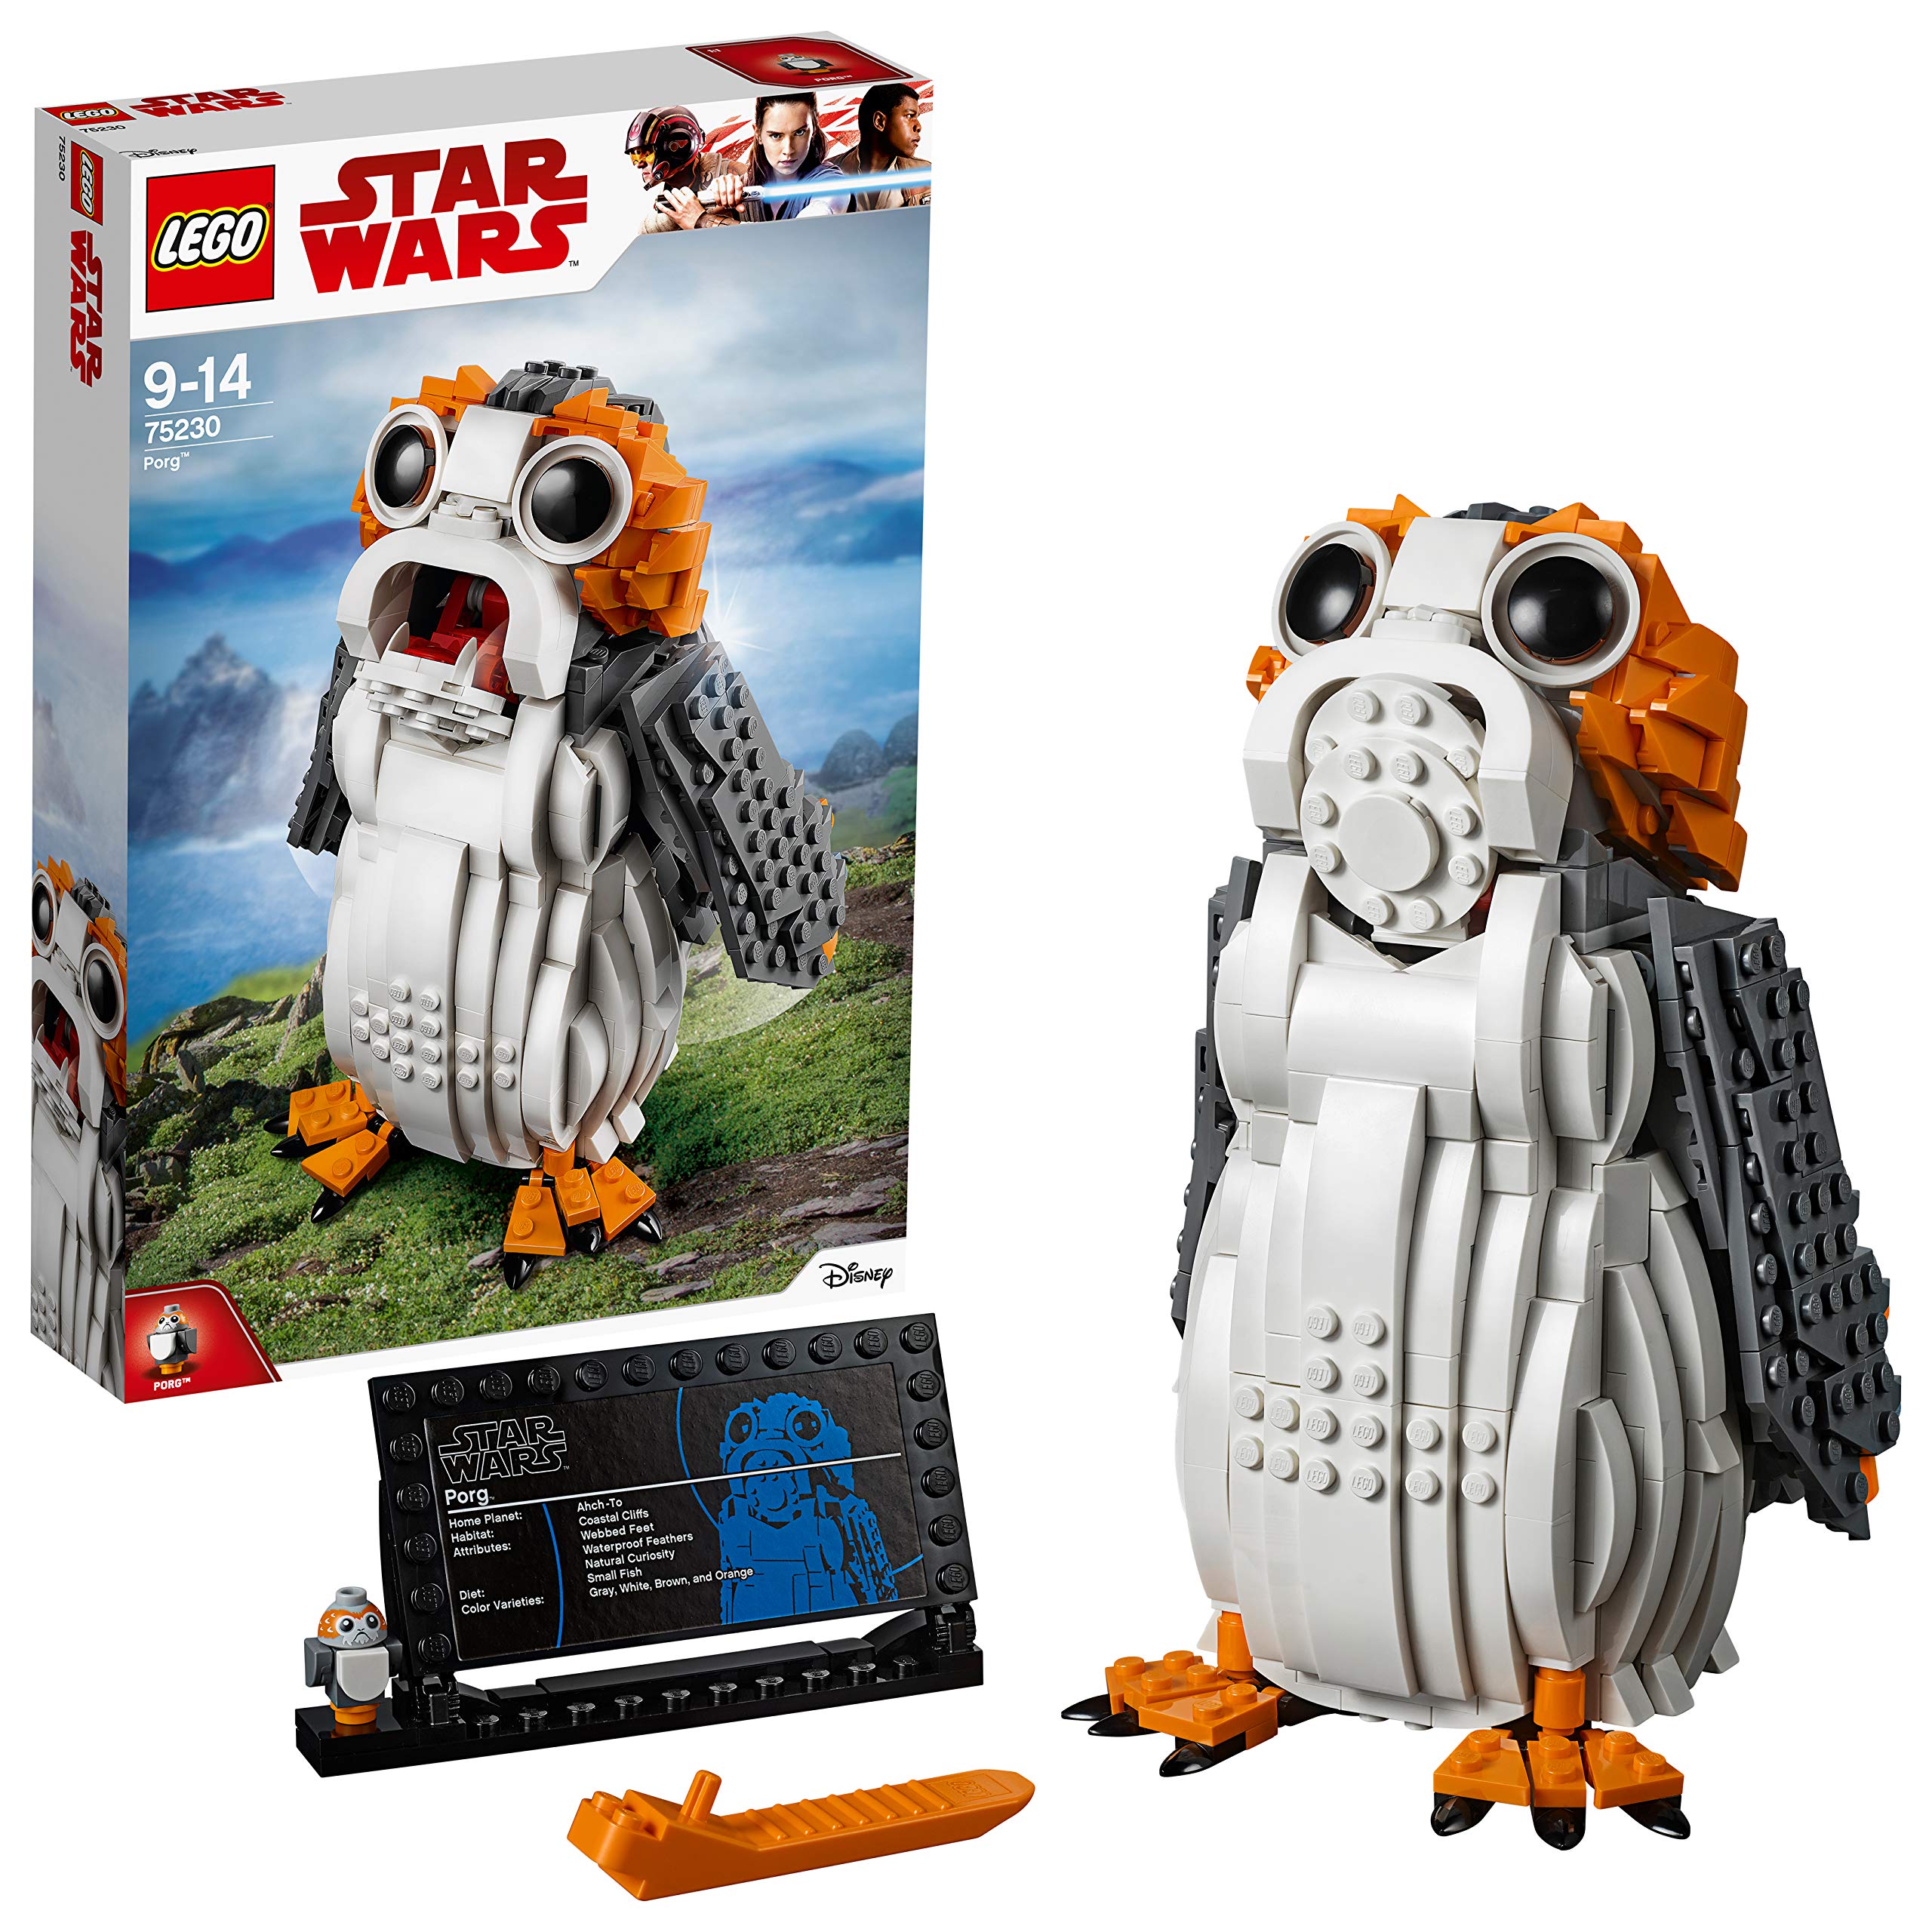 LEGO Star Wars PORG Building Set, Ahch-to Sea-Dwelling Bird Figure, Collectible Model